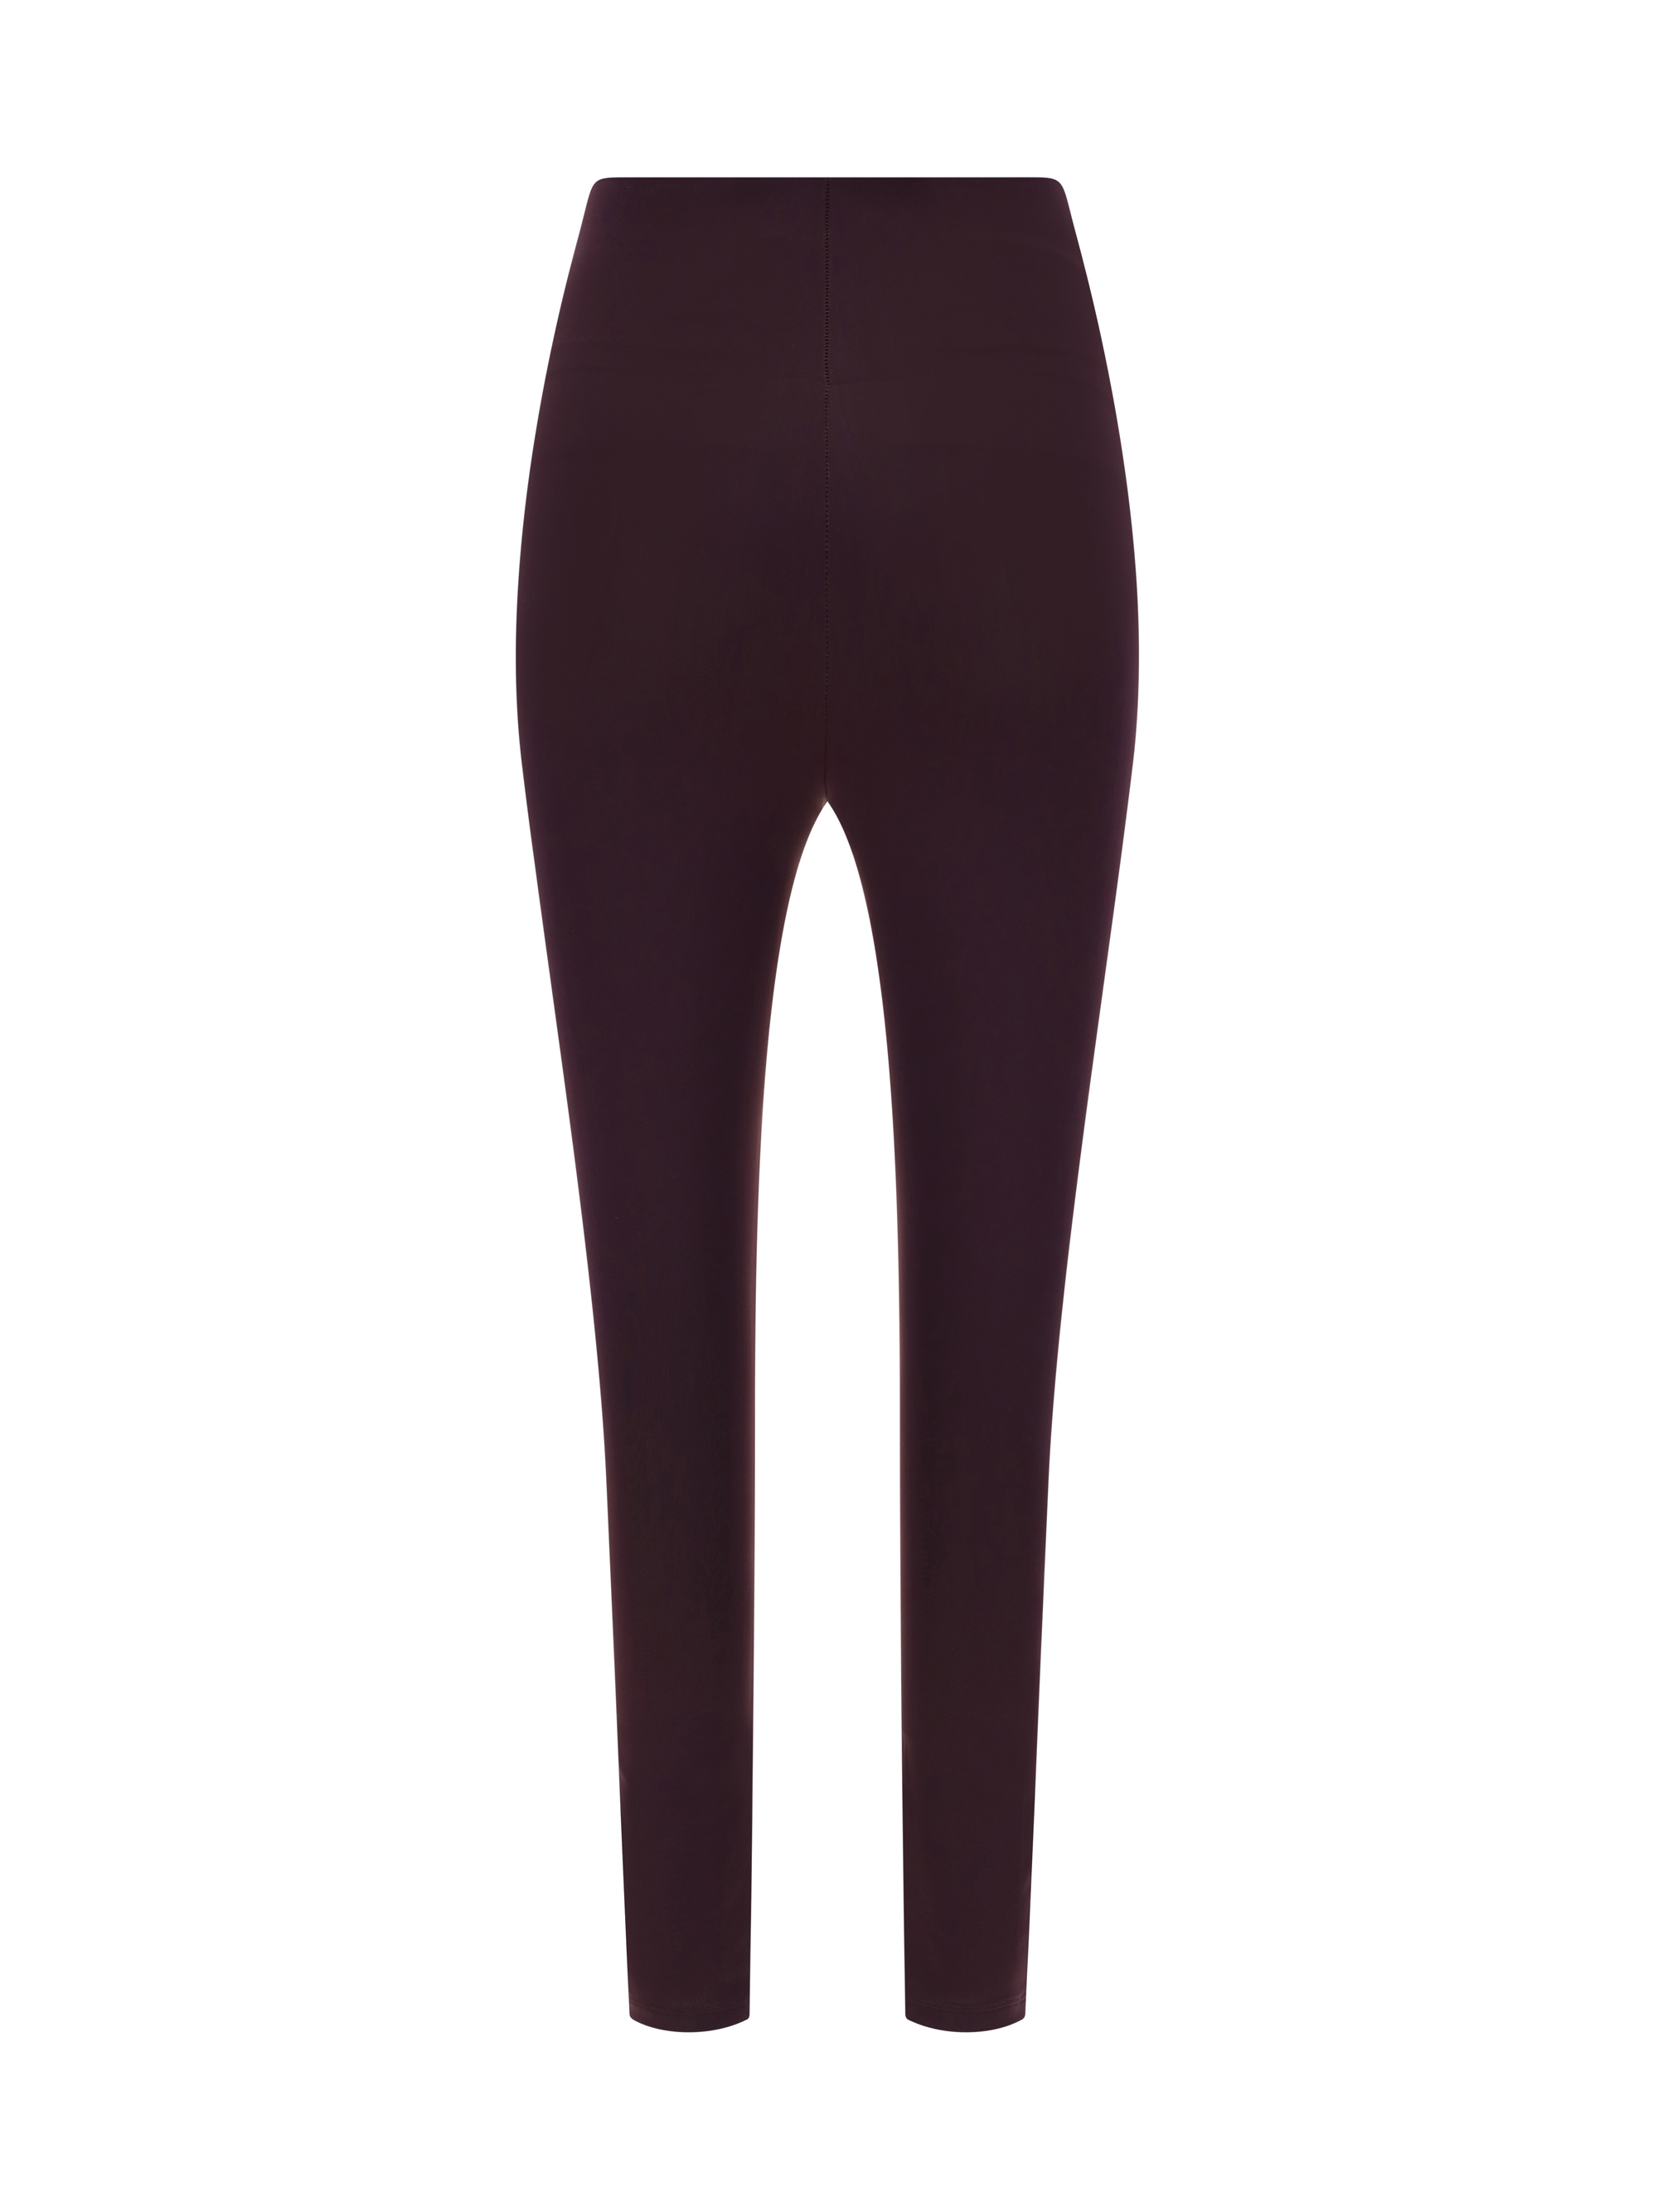 The Andamane Holly 80's Legging in Ultra Violet